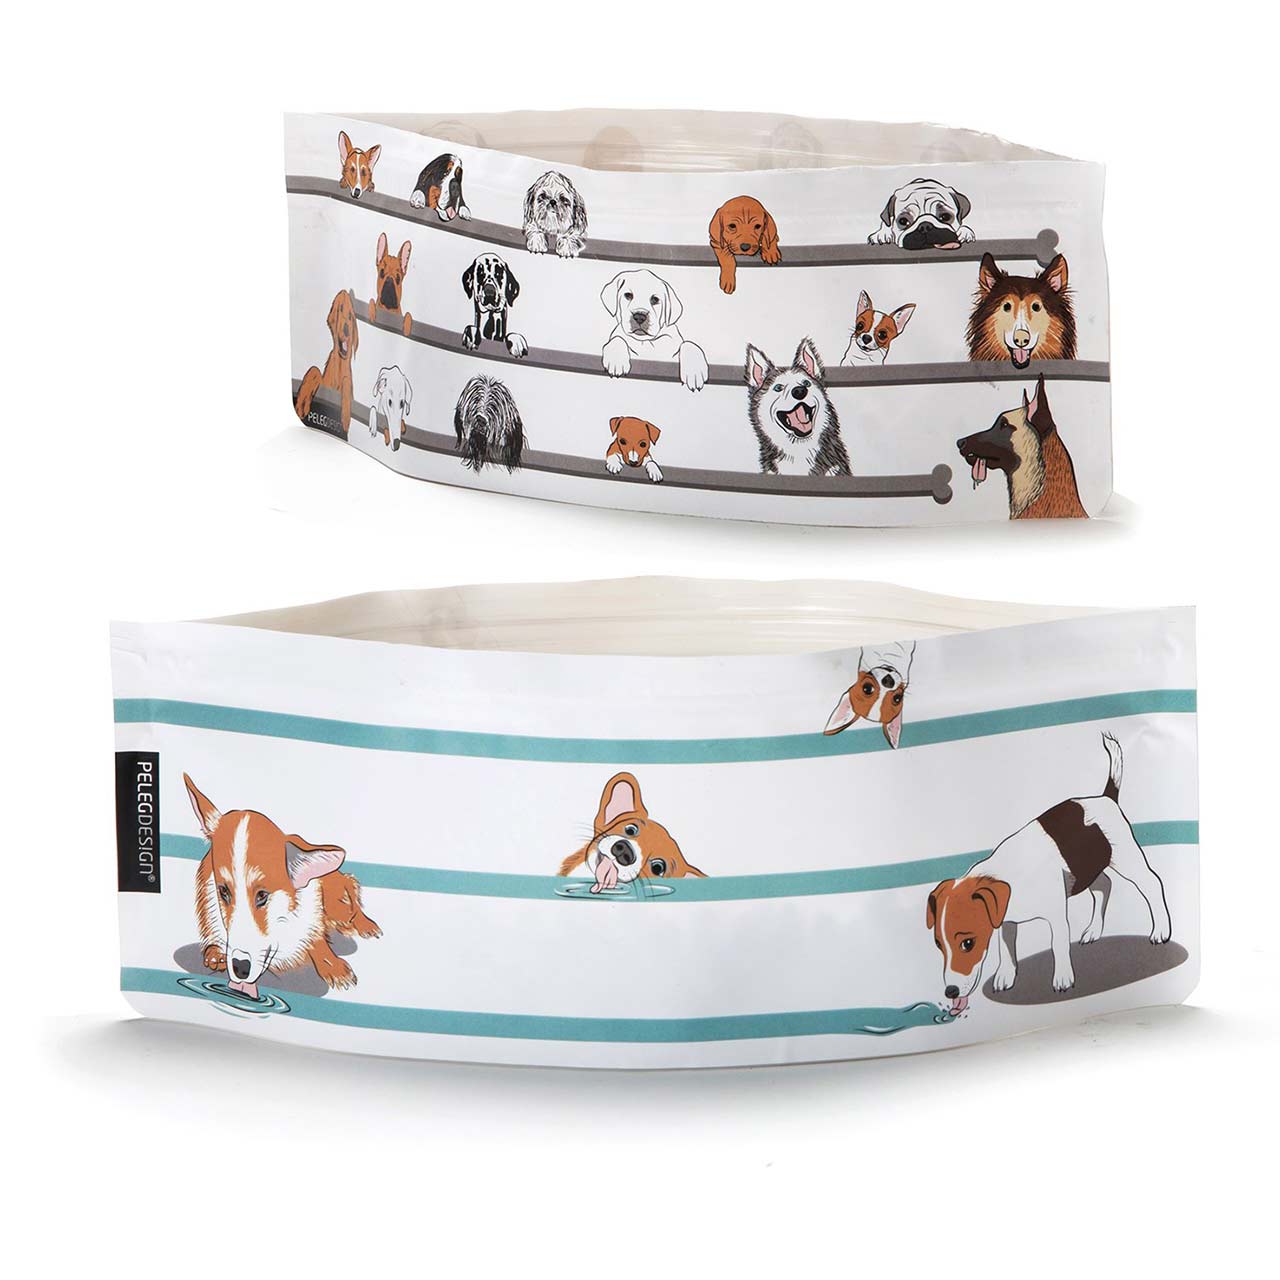  Expandable Dog Bowl Set Wuff'n'Go by Peleg | The Design Gift Shop